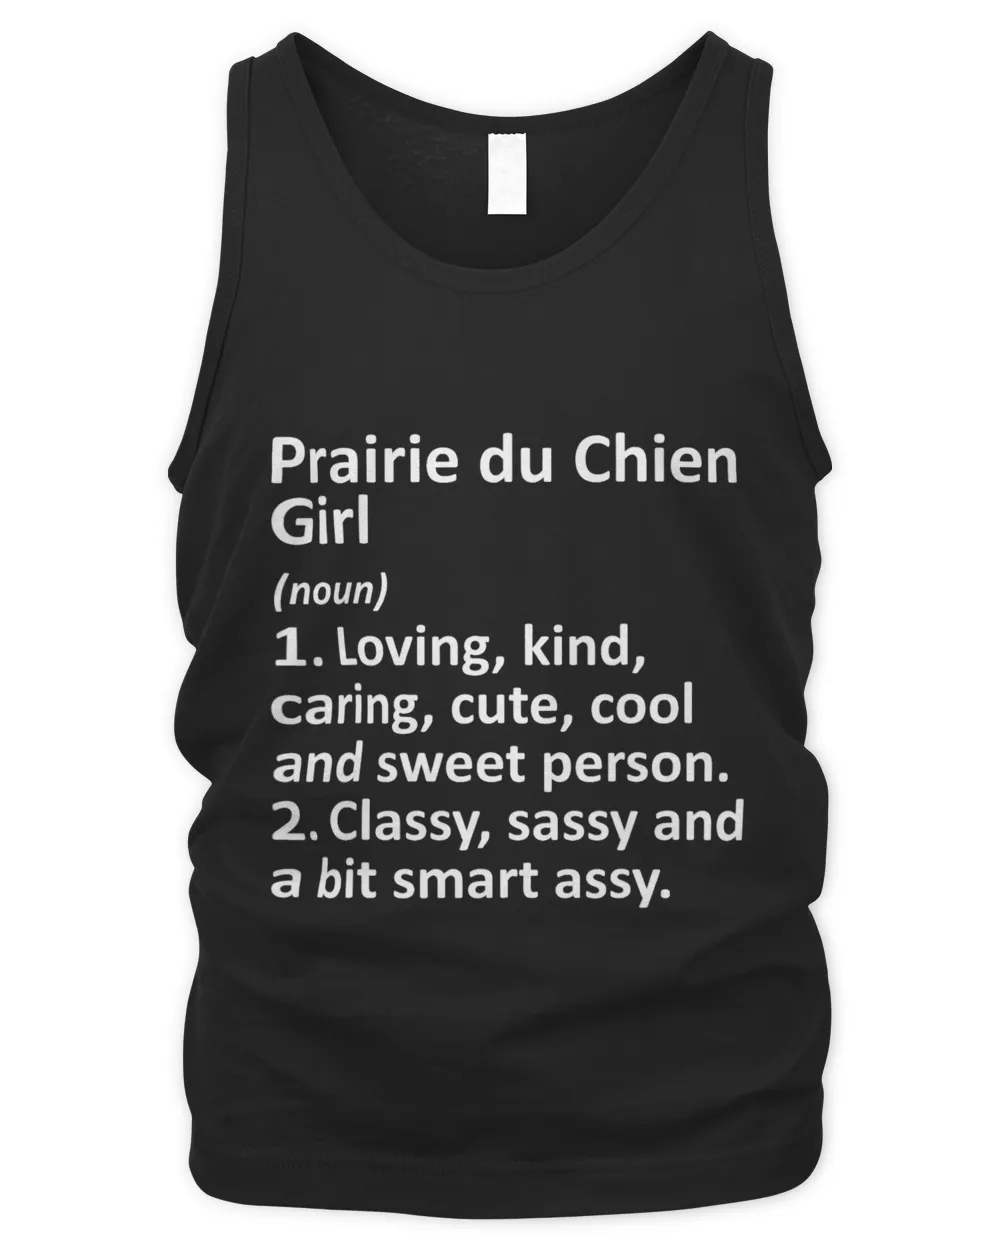 PRAIRIE DU CHIEN GIRL WI WISCONSIN Funny City Roots Gift